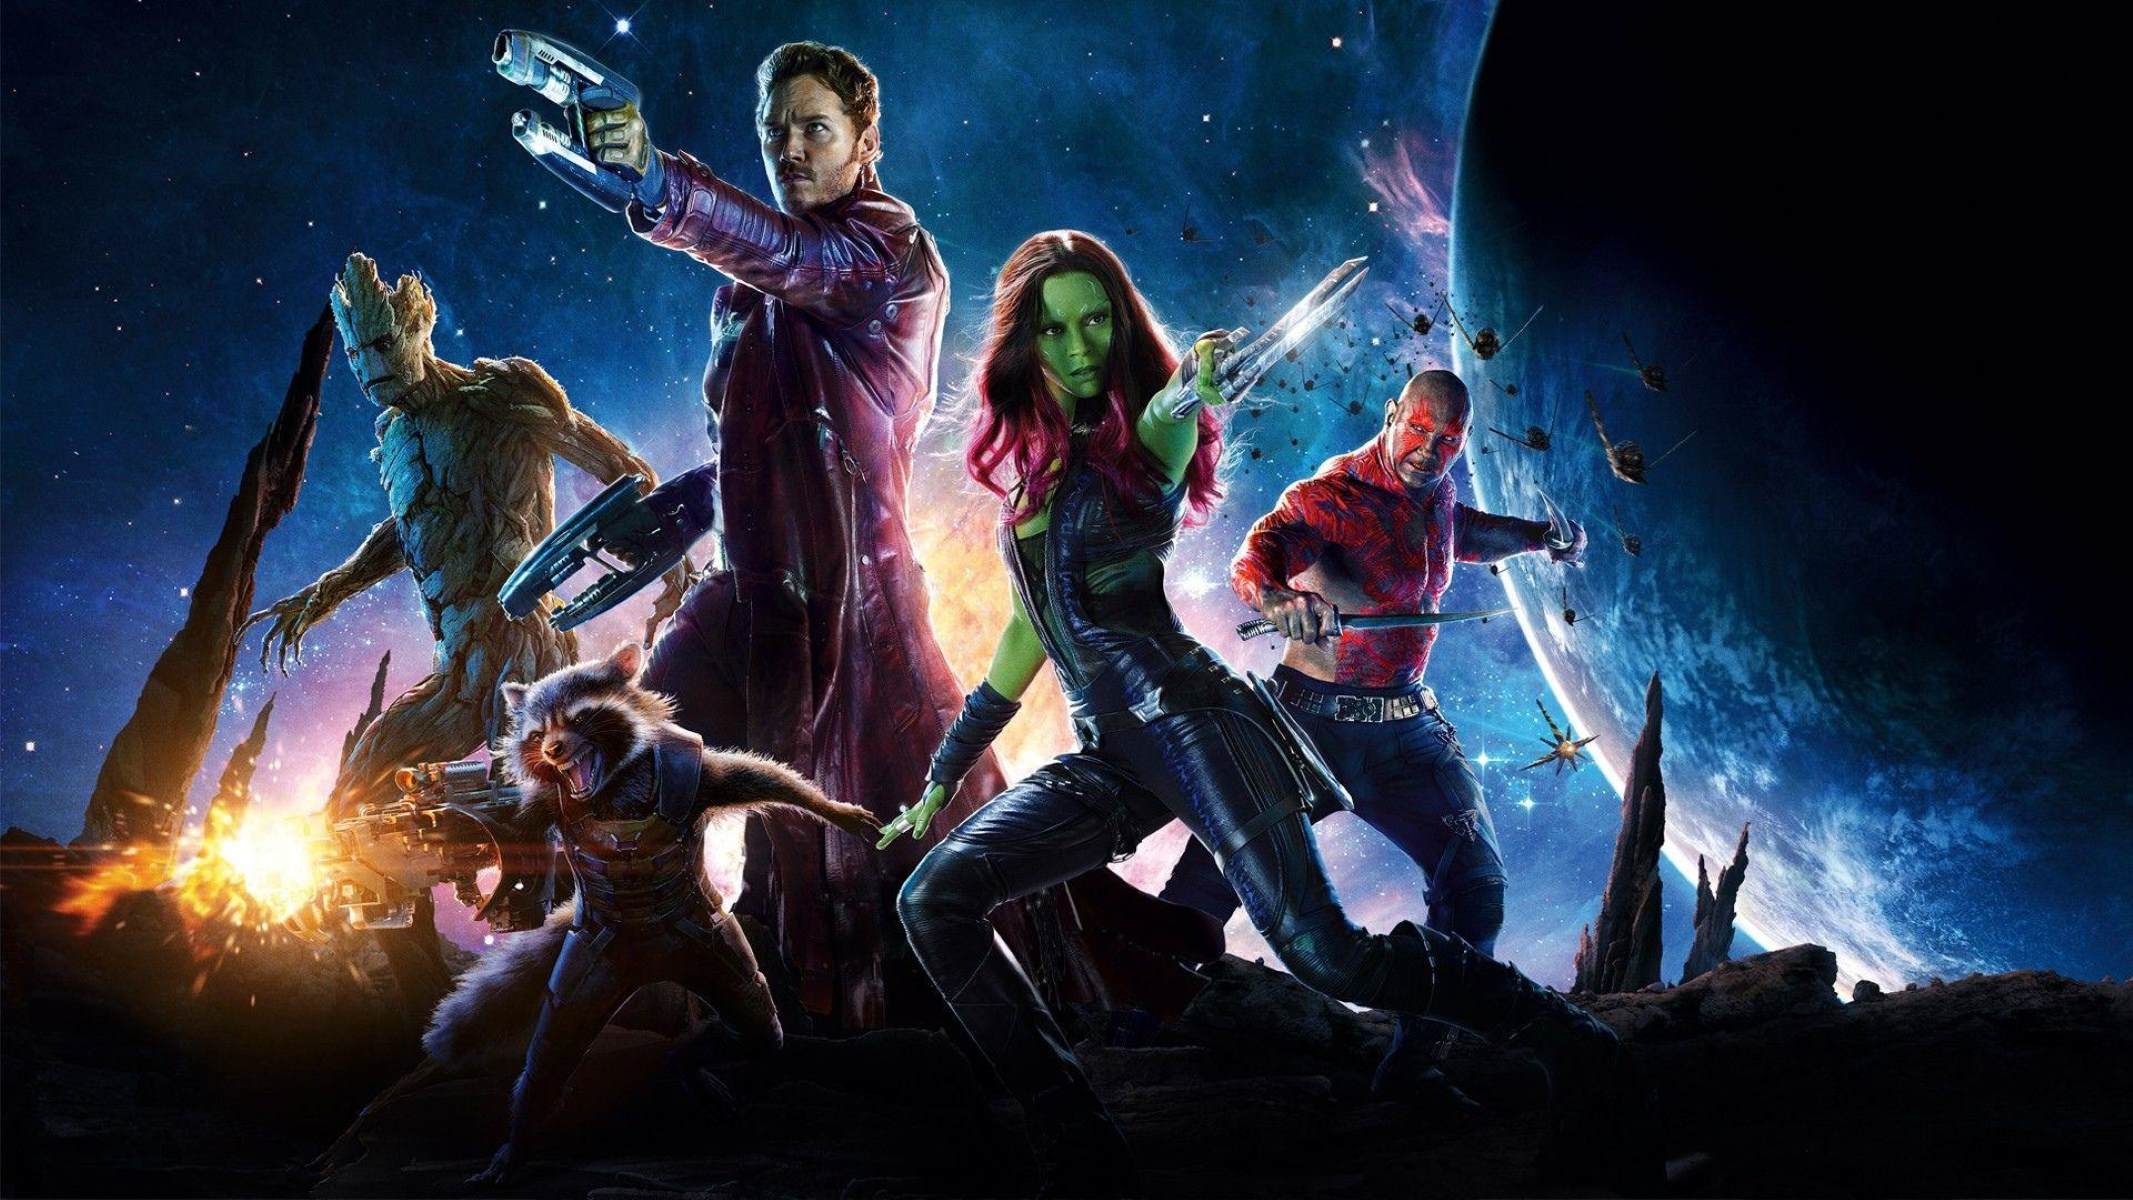 The Ultimate Guide To Watching The Guardians Of The Galaxy Series!